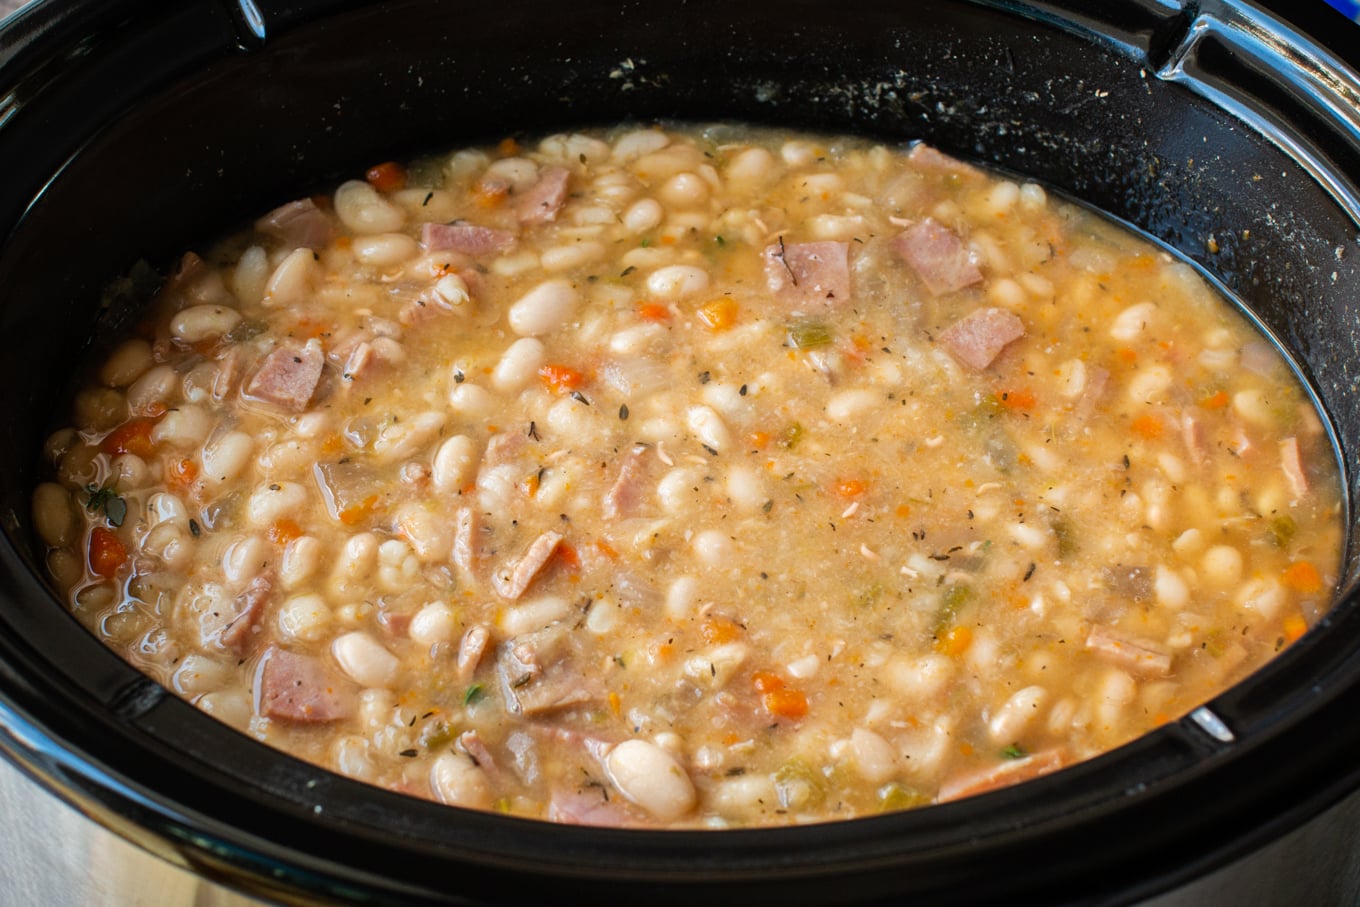 Finished ham and beans in crockpot, very creamy